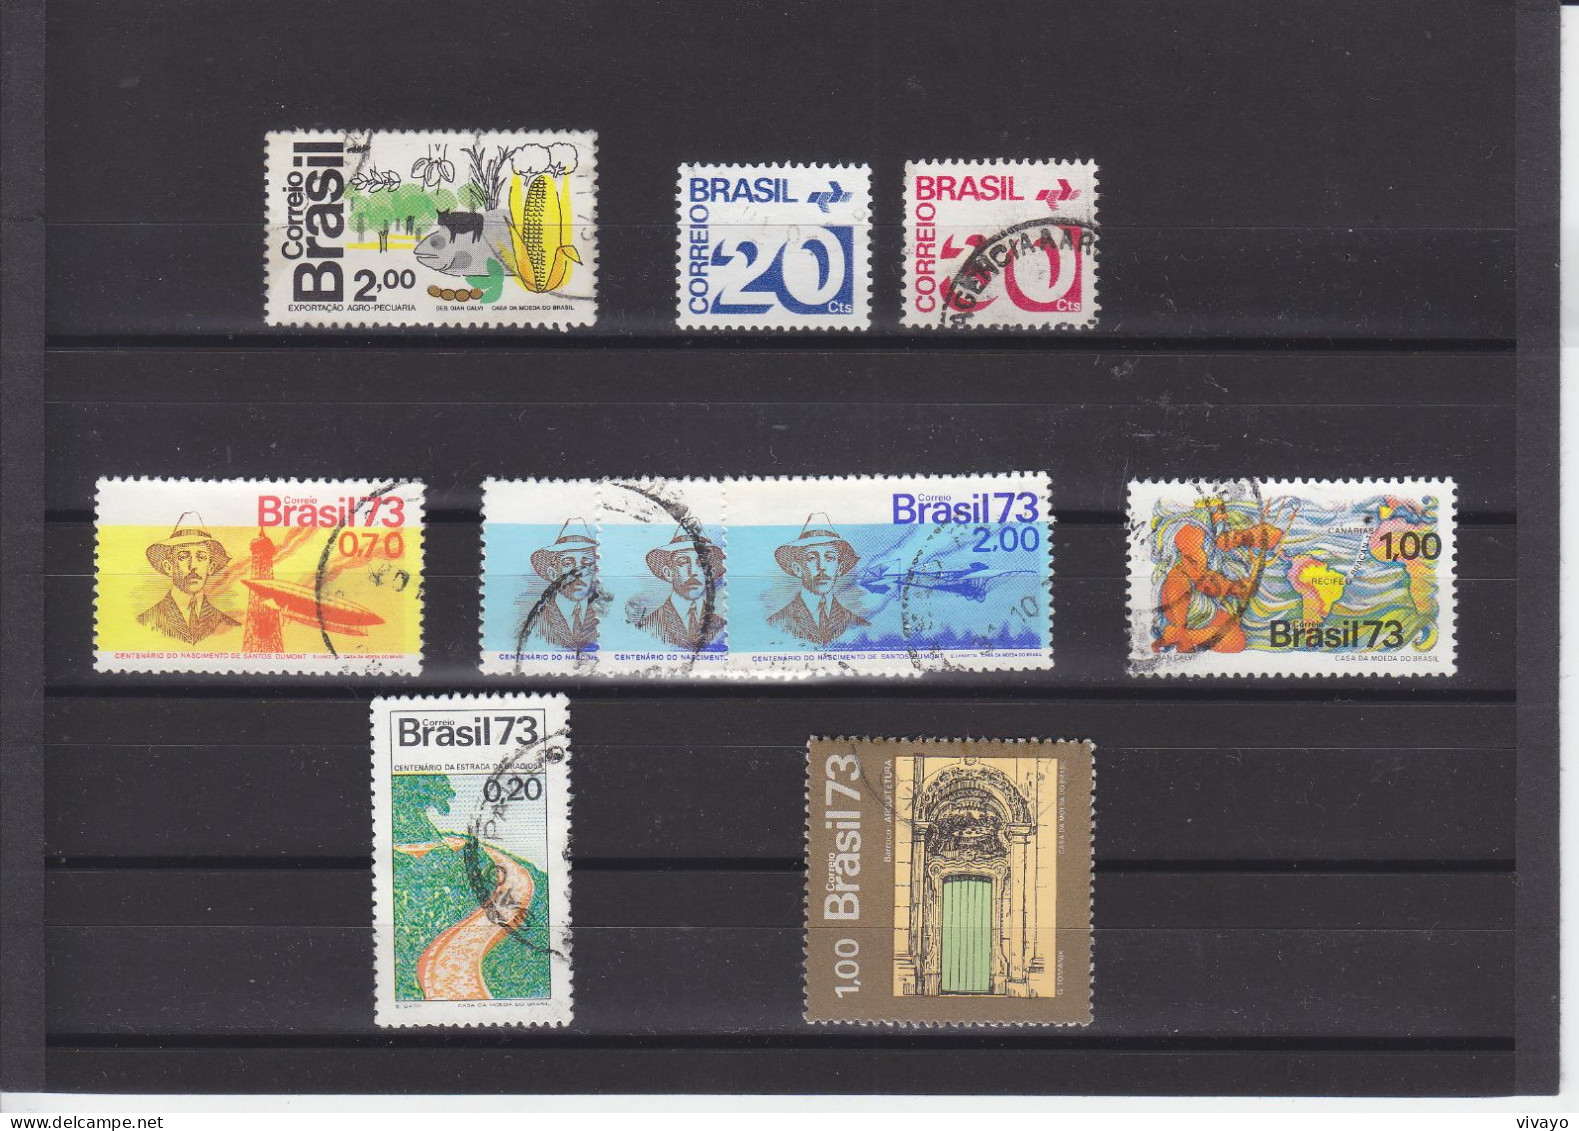 BRAZIL - BRESIL - BRASIL - O / FINE CANCELLED - 1973 - AGRO EXPORT, SANTOS DUMONT, OCEAN CABLE, GRACIOSA ROAD - Used Stamps